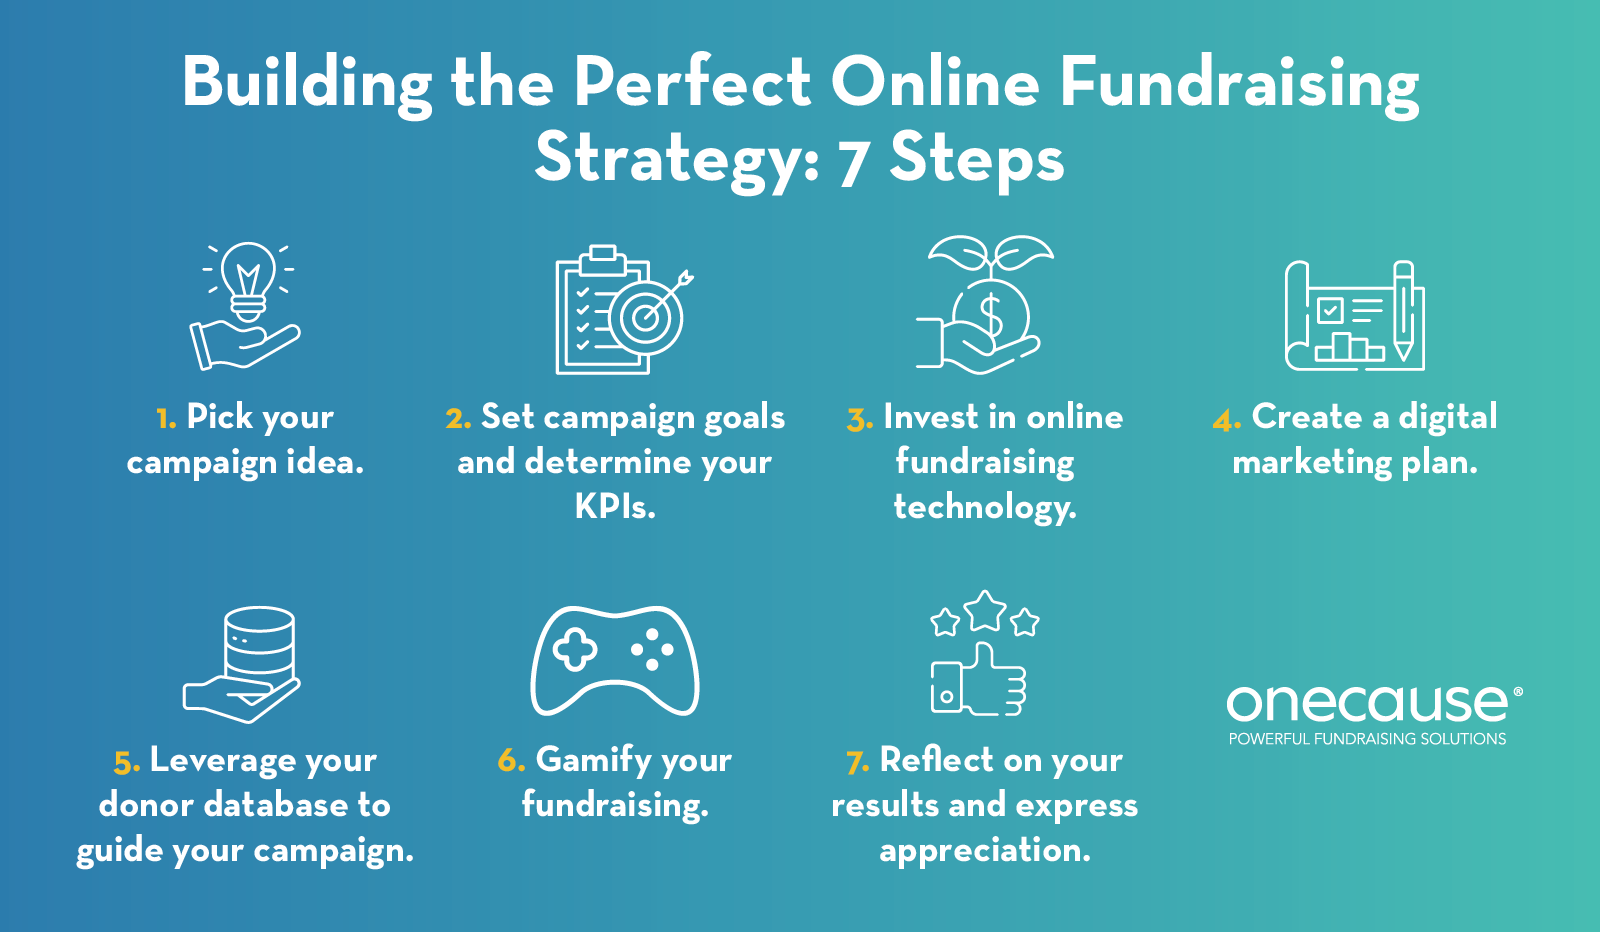 Use these steps to lead the perfect online fundraising campaign. 